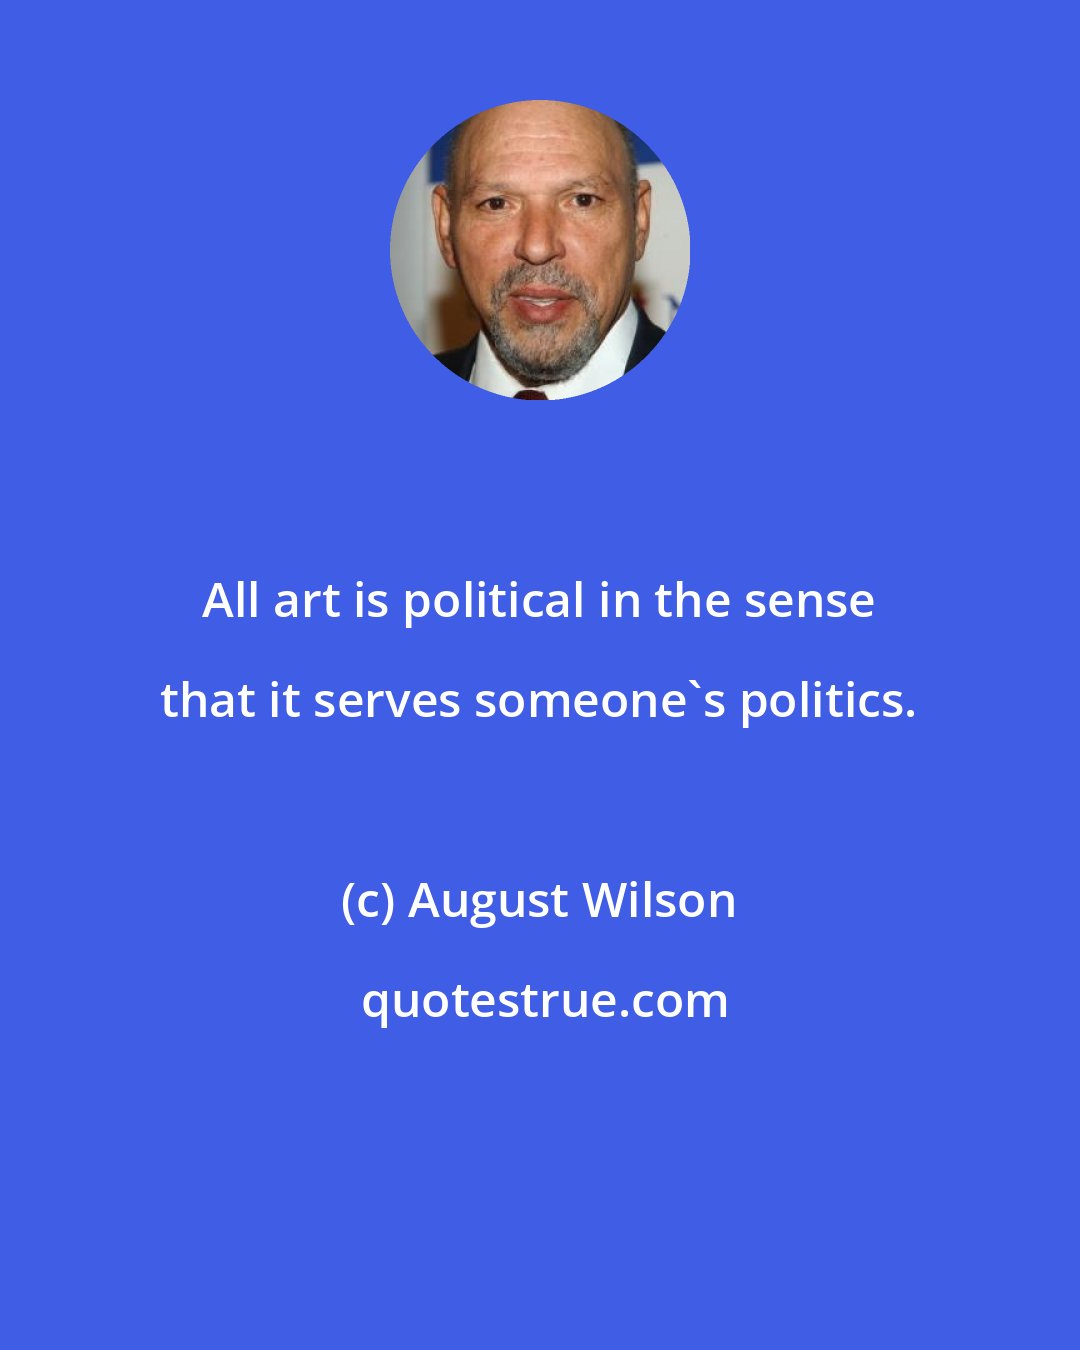 August Wilson: All art is political in the sense that it serves someone's politics.